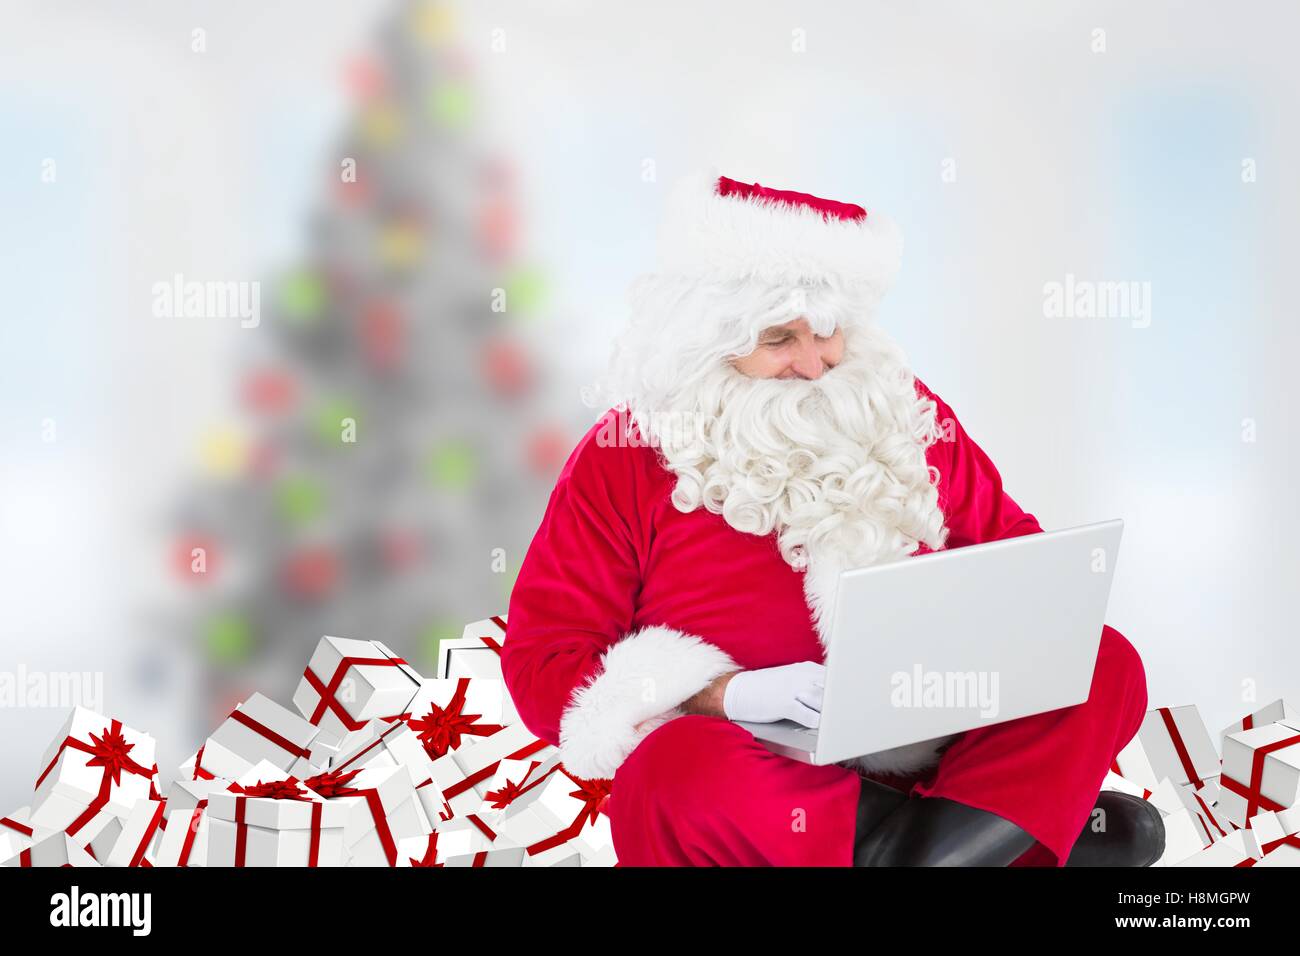 Santa claus sitting with gifts and using laptop Stock Photo